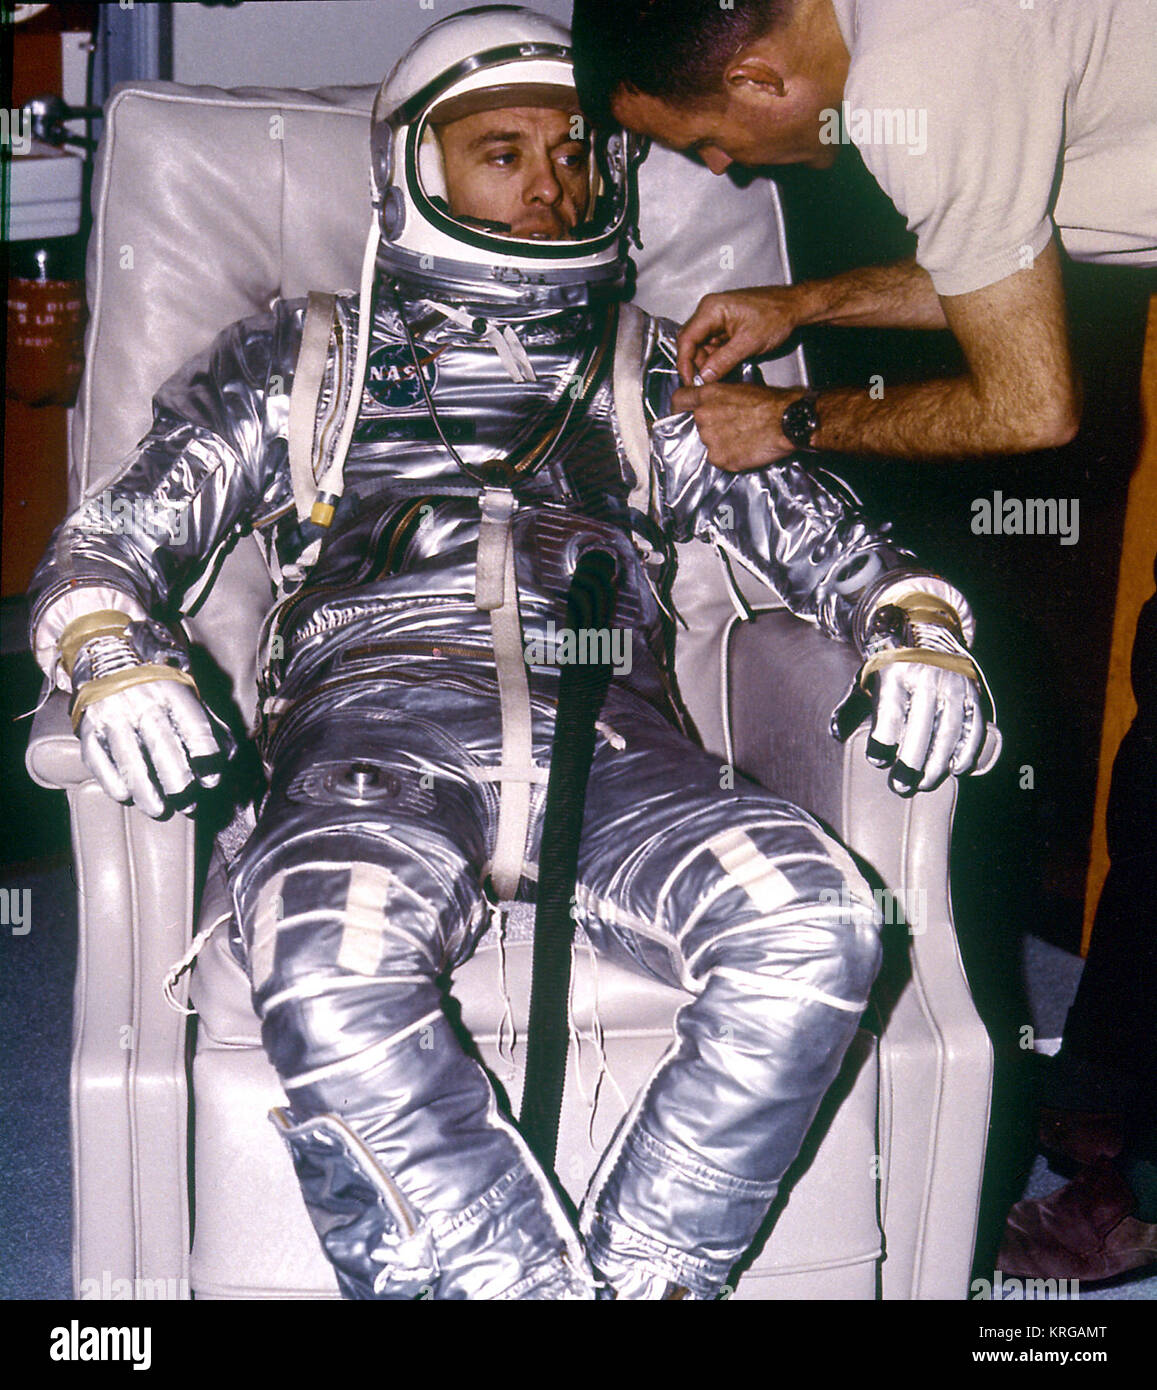 Astronaut Alan B. Shepard, Jr. During Suiting for First Manned Suborbital Flight on MR-3 (Mercury-Redstone) Freedom 7, on May 5, 1961 (MIX FILE) Shepard prior to flight MSFC-9248359 Stock Photo